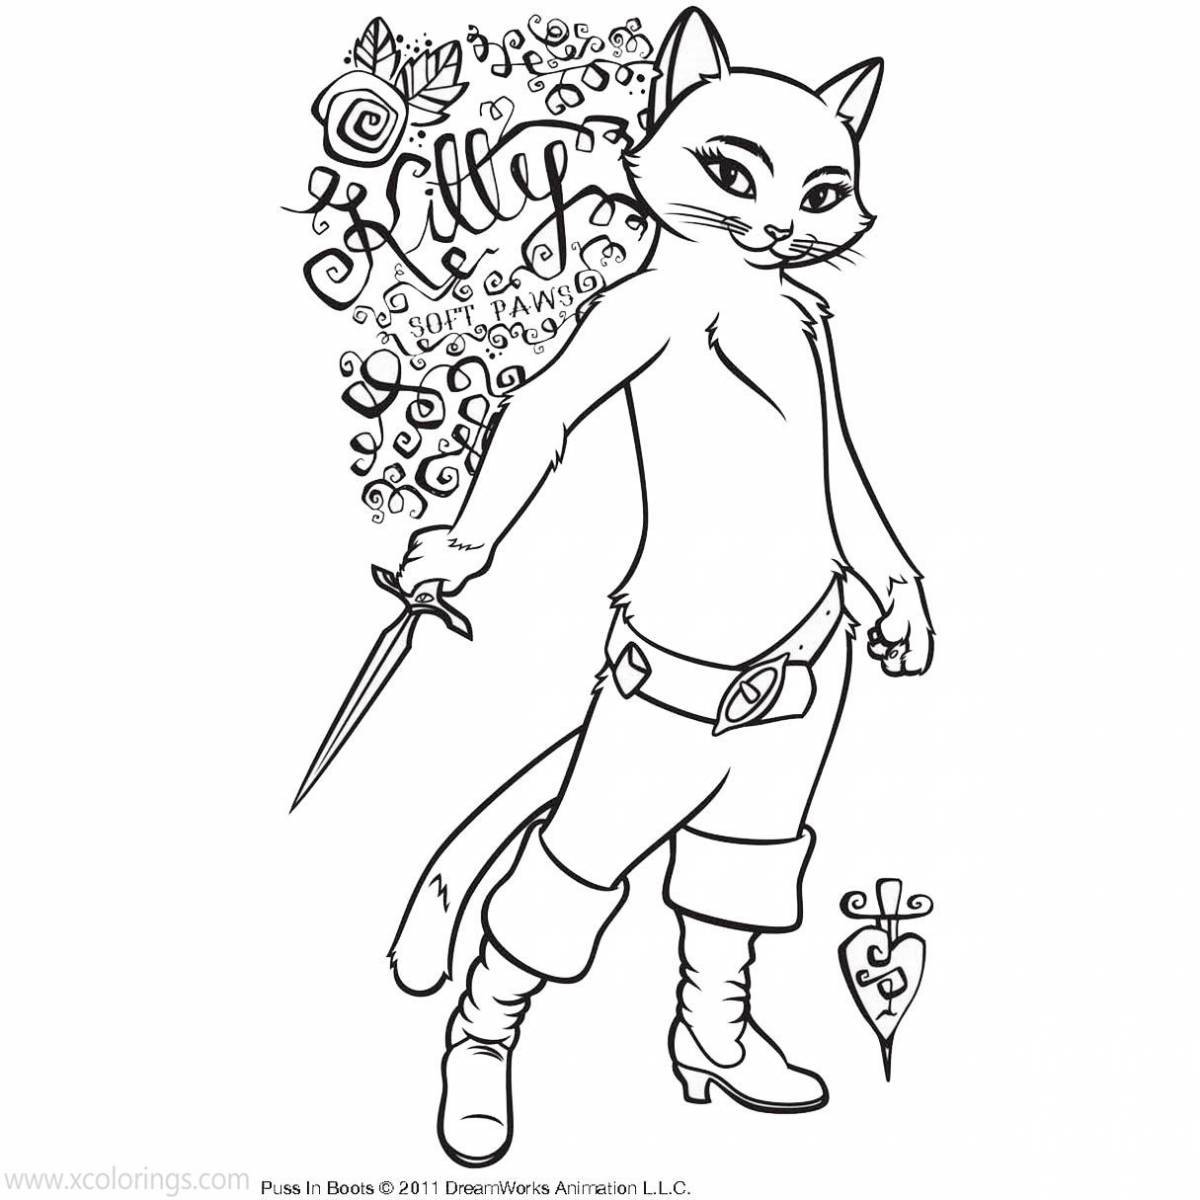 Puss in Boots for kids #1